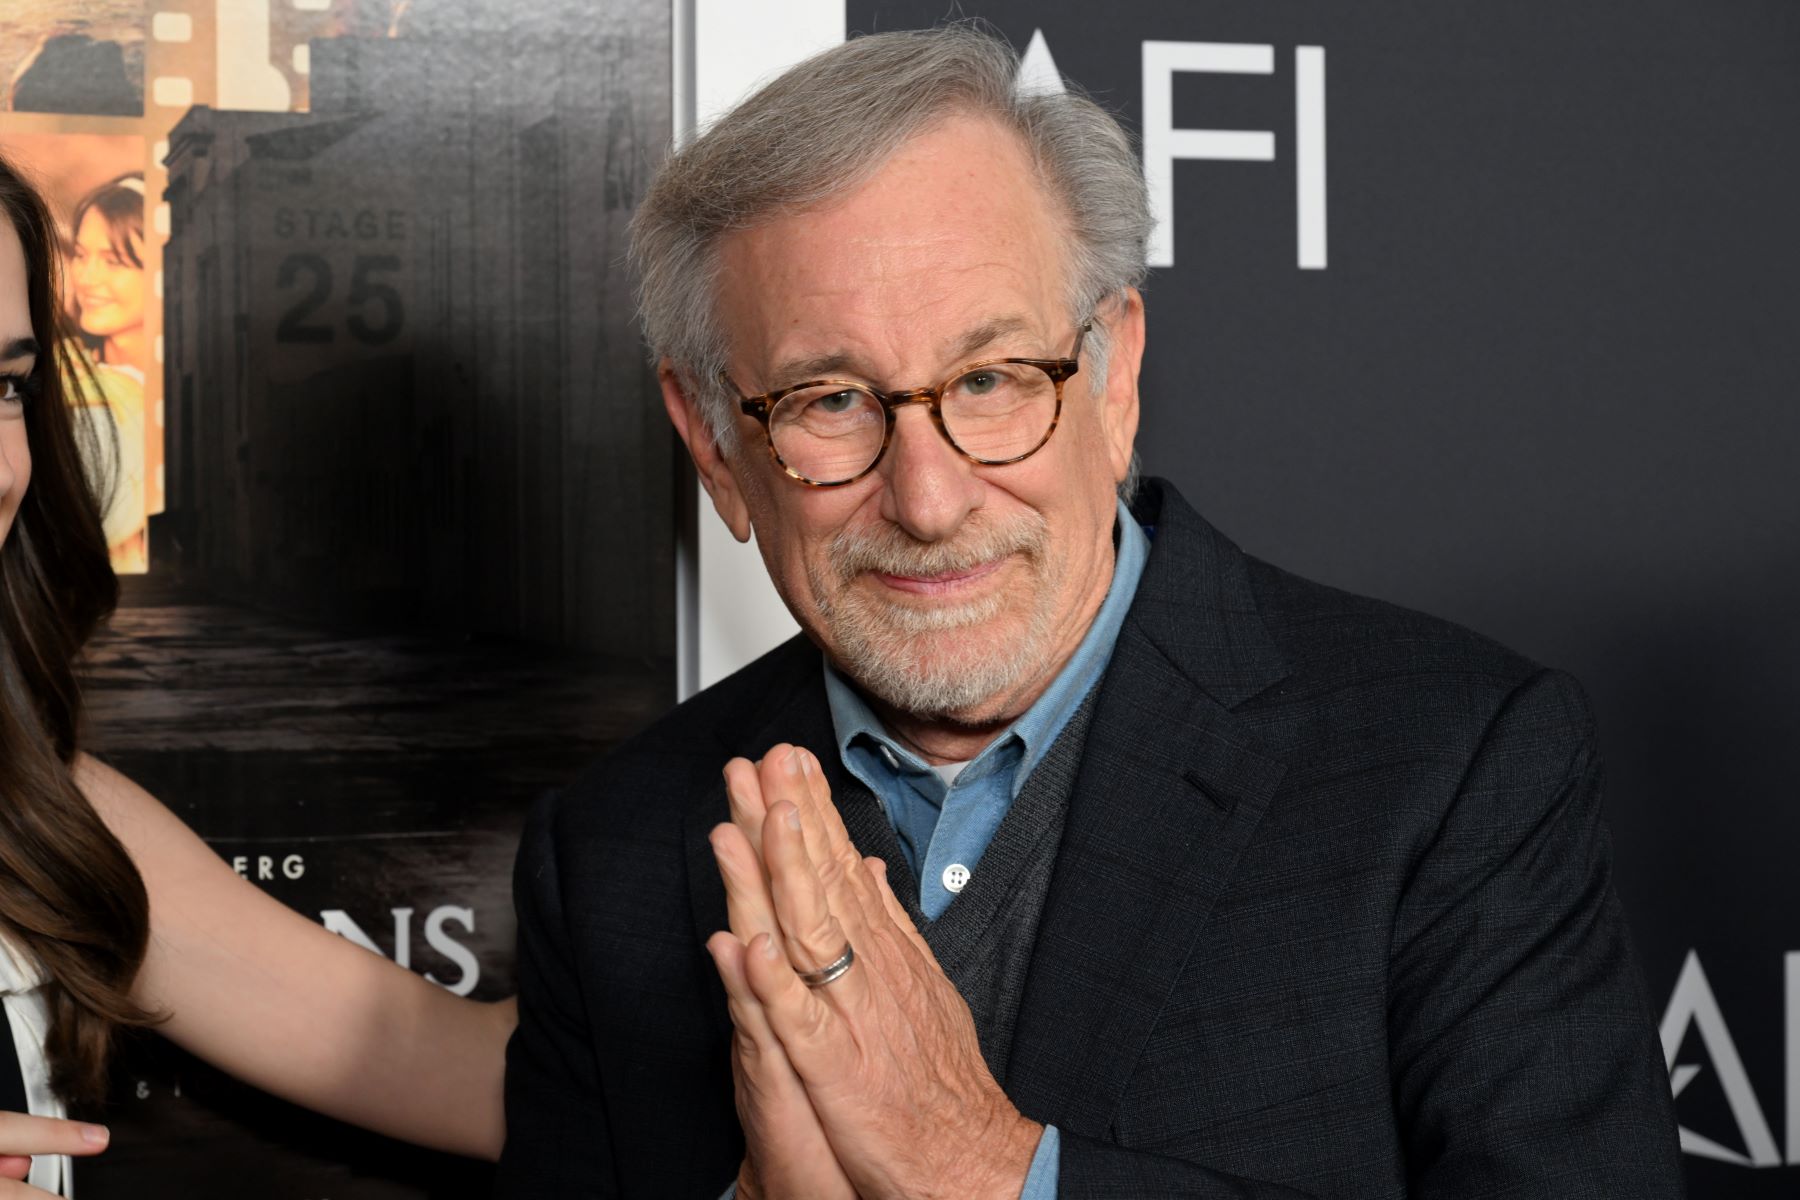 ‘The Fabelmans’: Steven Spielberg Includes Easter Eggs From Indiana Jones, E.T., and His Other Iconic Films